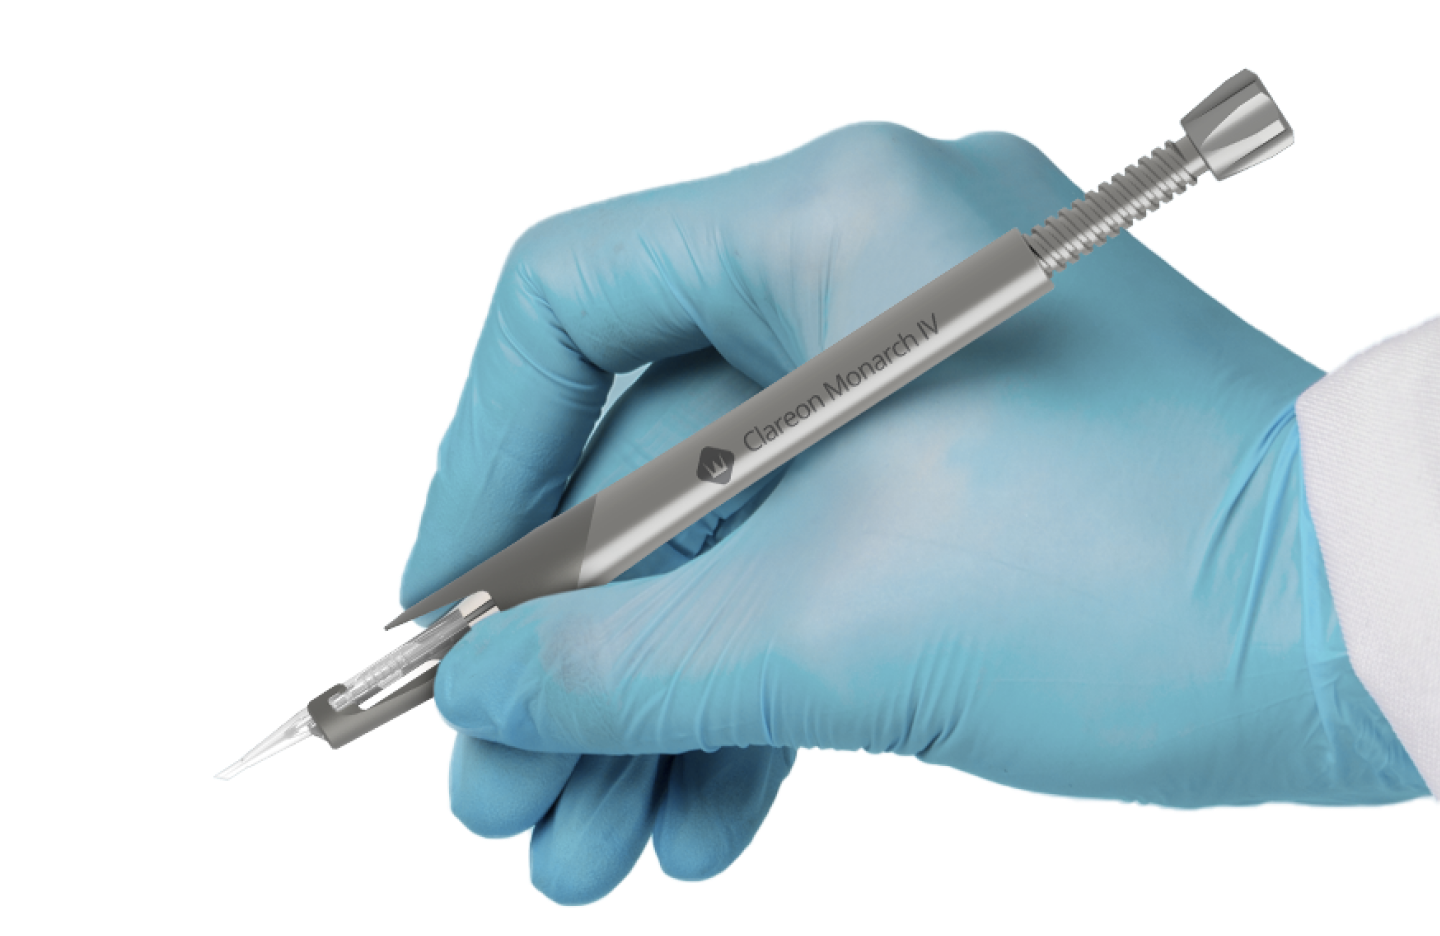 Hand wearing a disposable glove holding a Clareon Monarch IV Handpiece, pointing downwards.